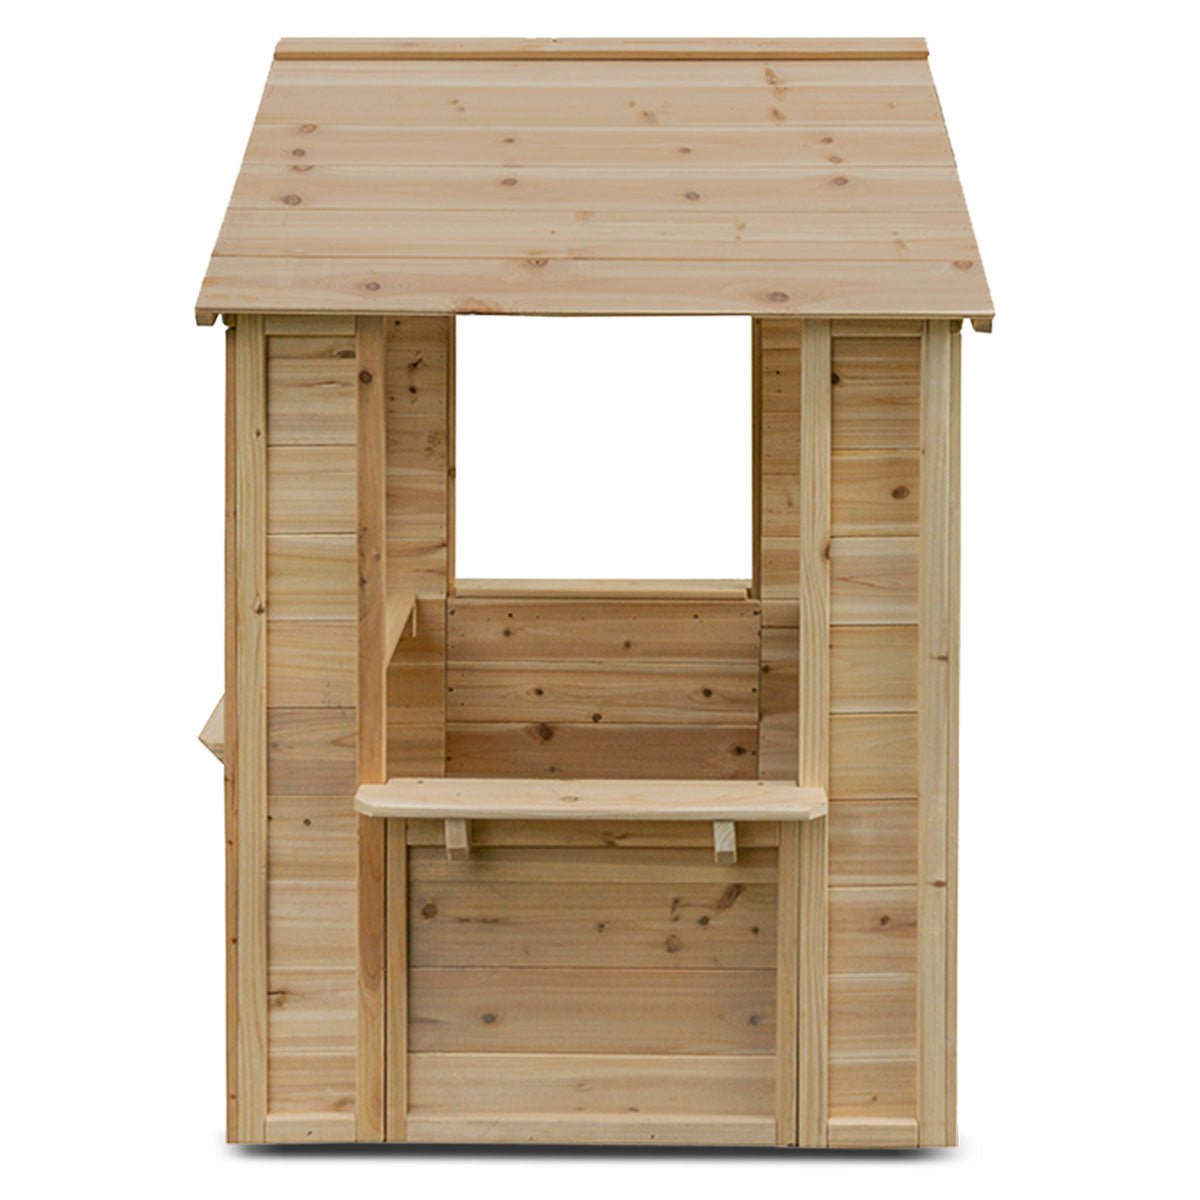 Café Chino Cubby House - A Space for Imaginative Play - Buy Today